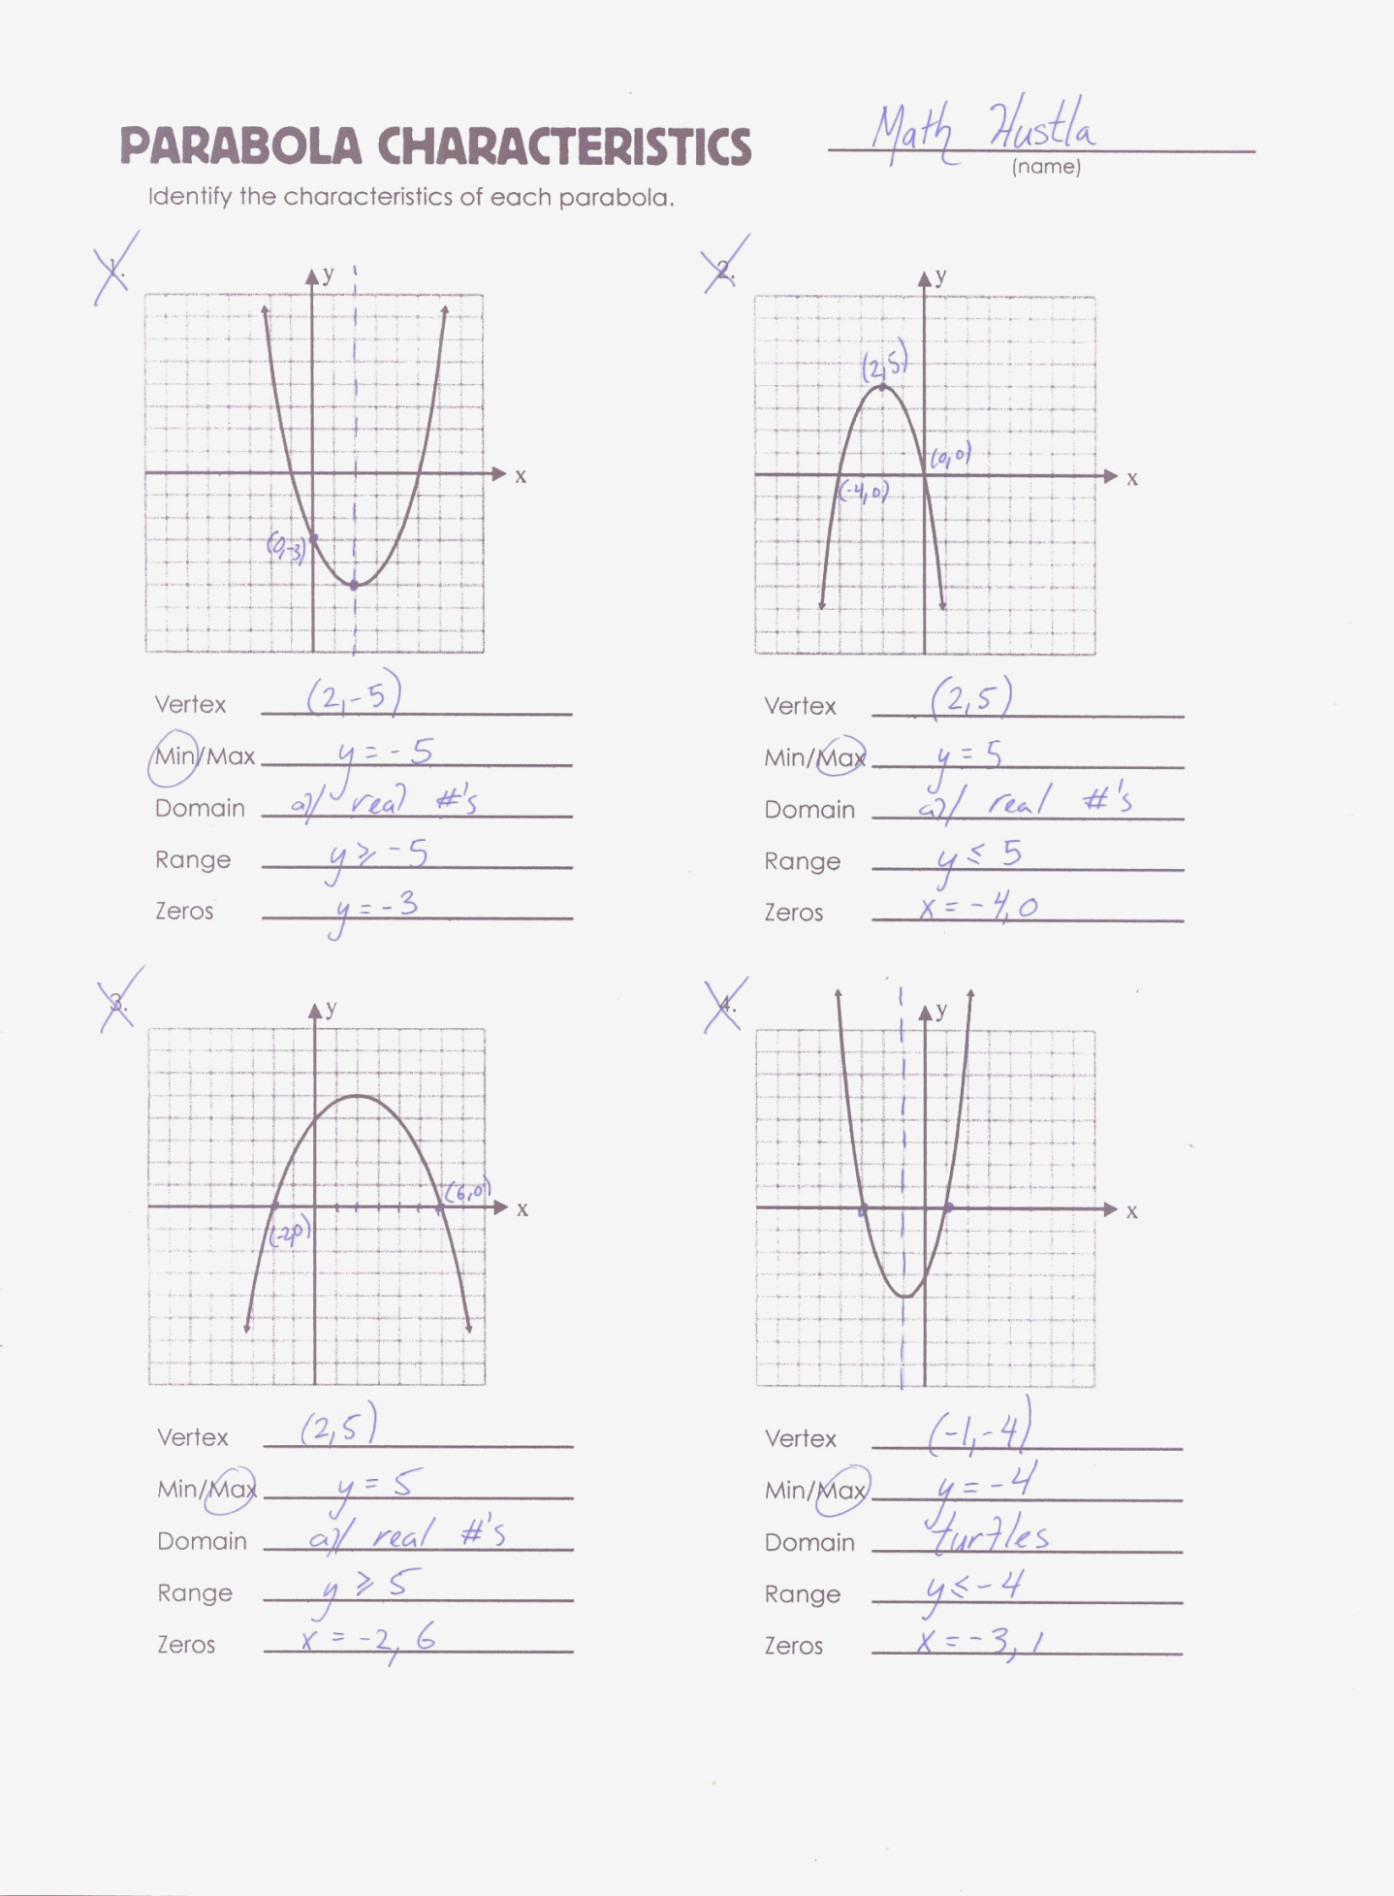 graphing-a-parabola-from-vertex-form-worksheet-answer-key-db-excel